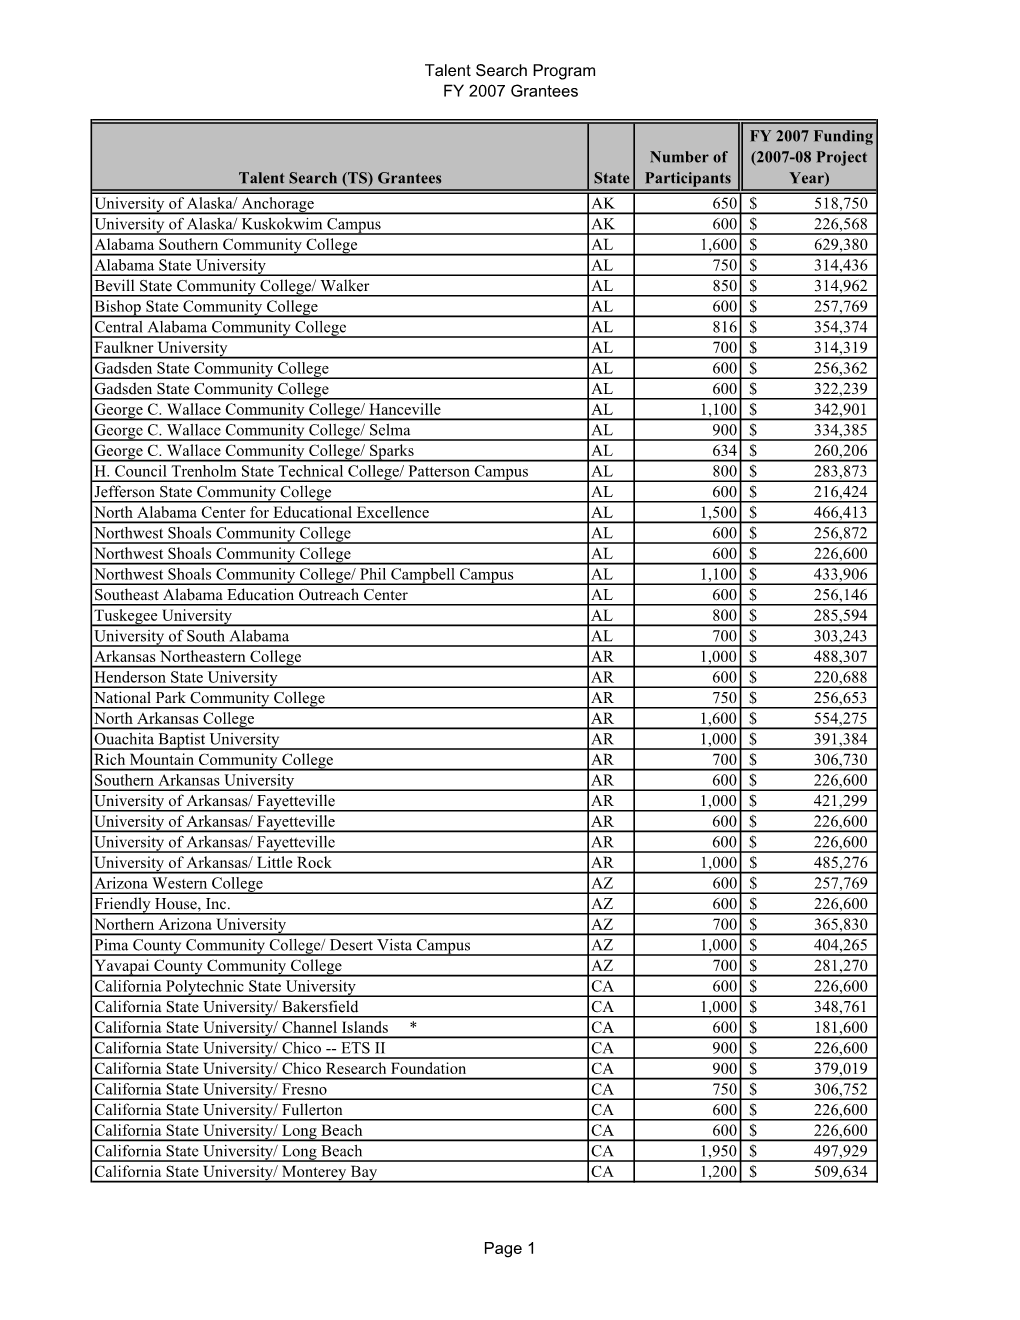 FY 2007 Grantees for the Talent Search Program (PDF)